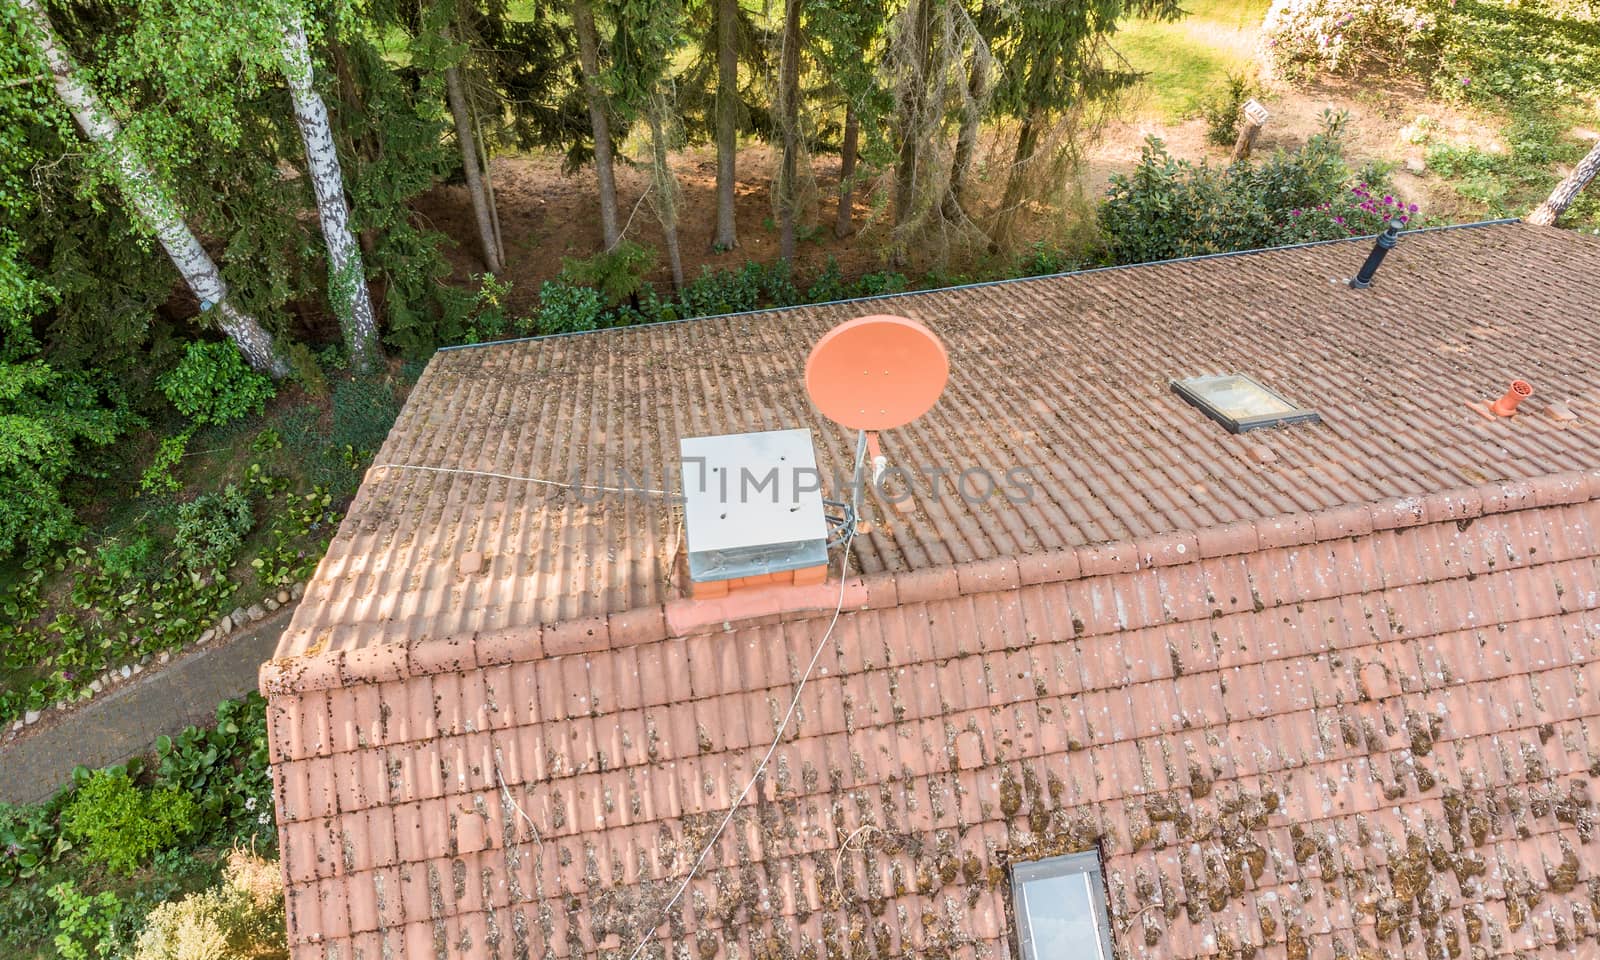 Overflight of the roof of a detached house to check the condition of the satellite antenna for the reception of television and Internet, aerial view by geogif